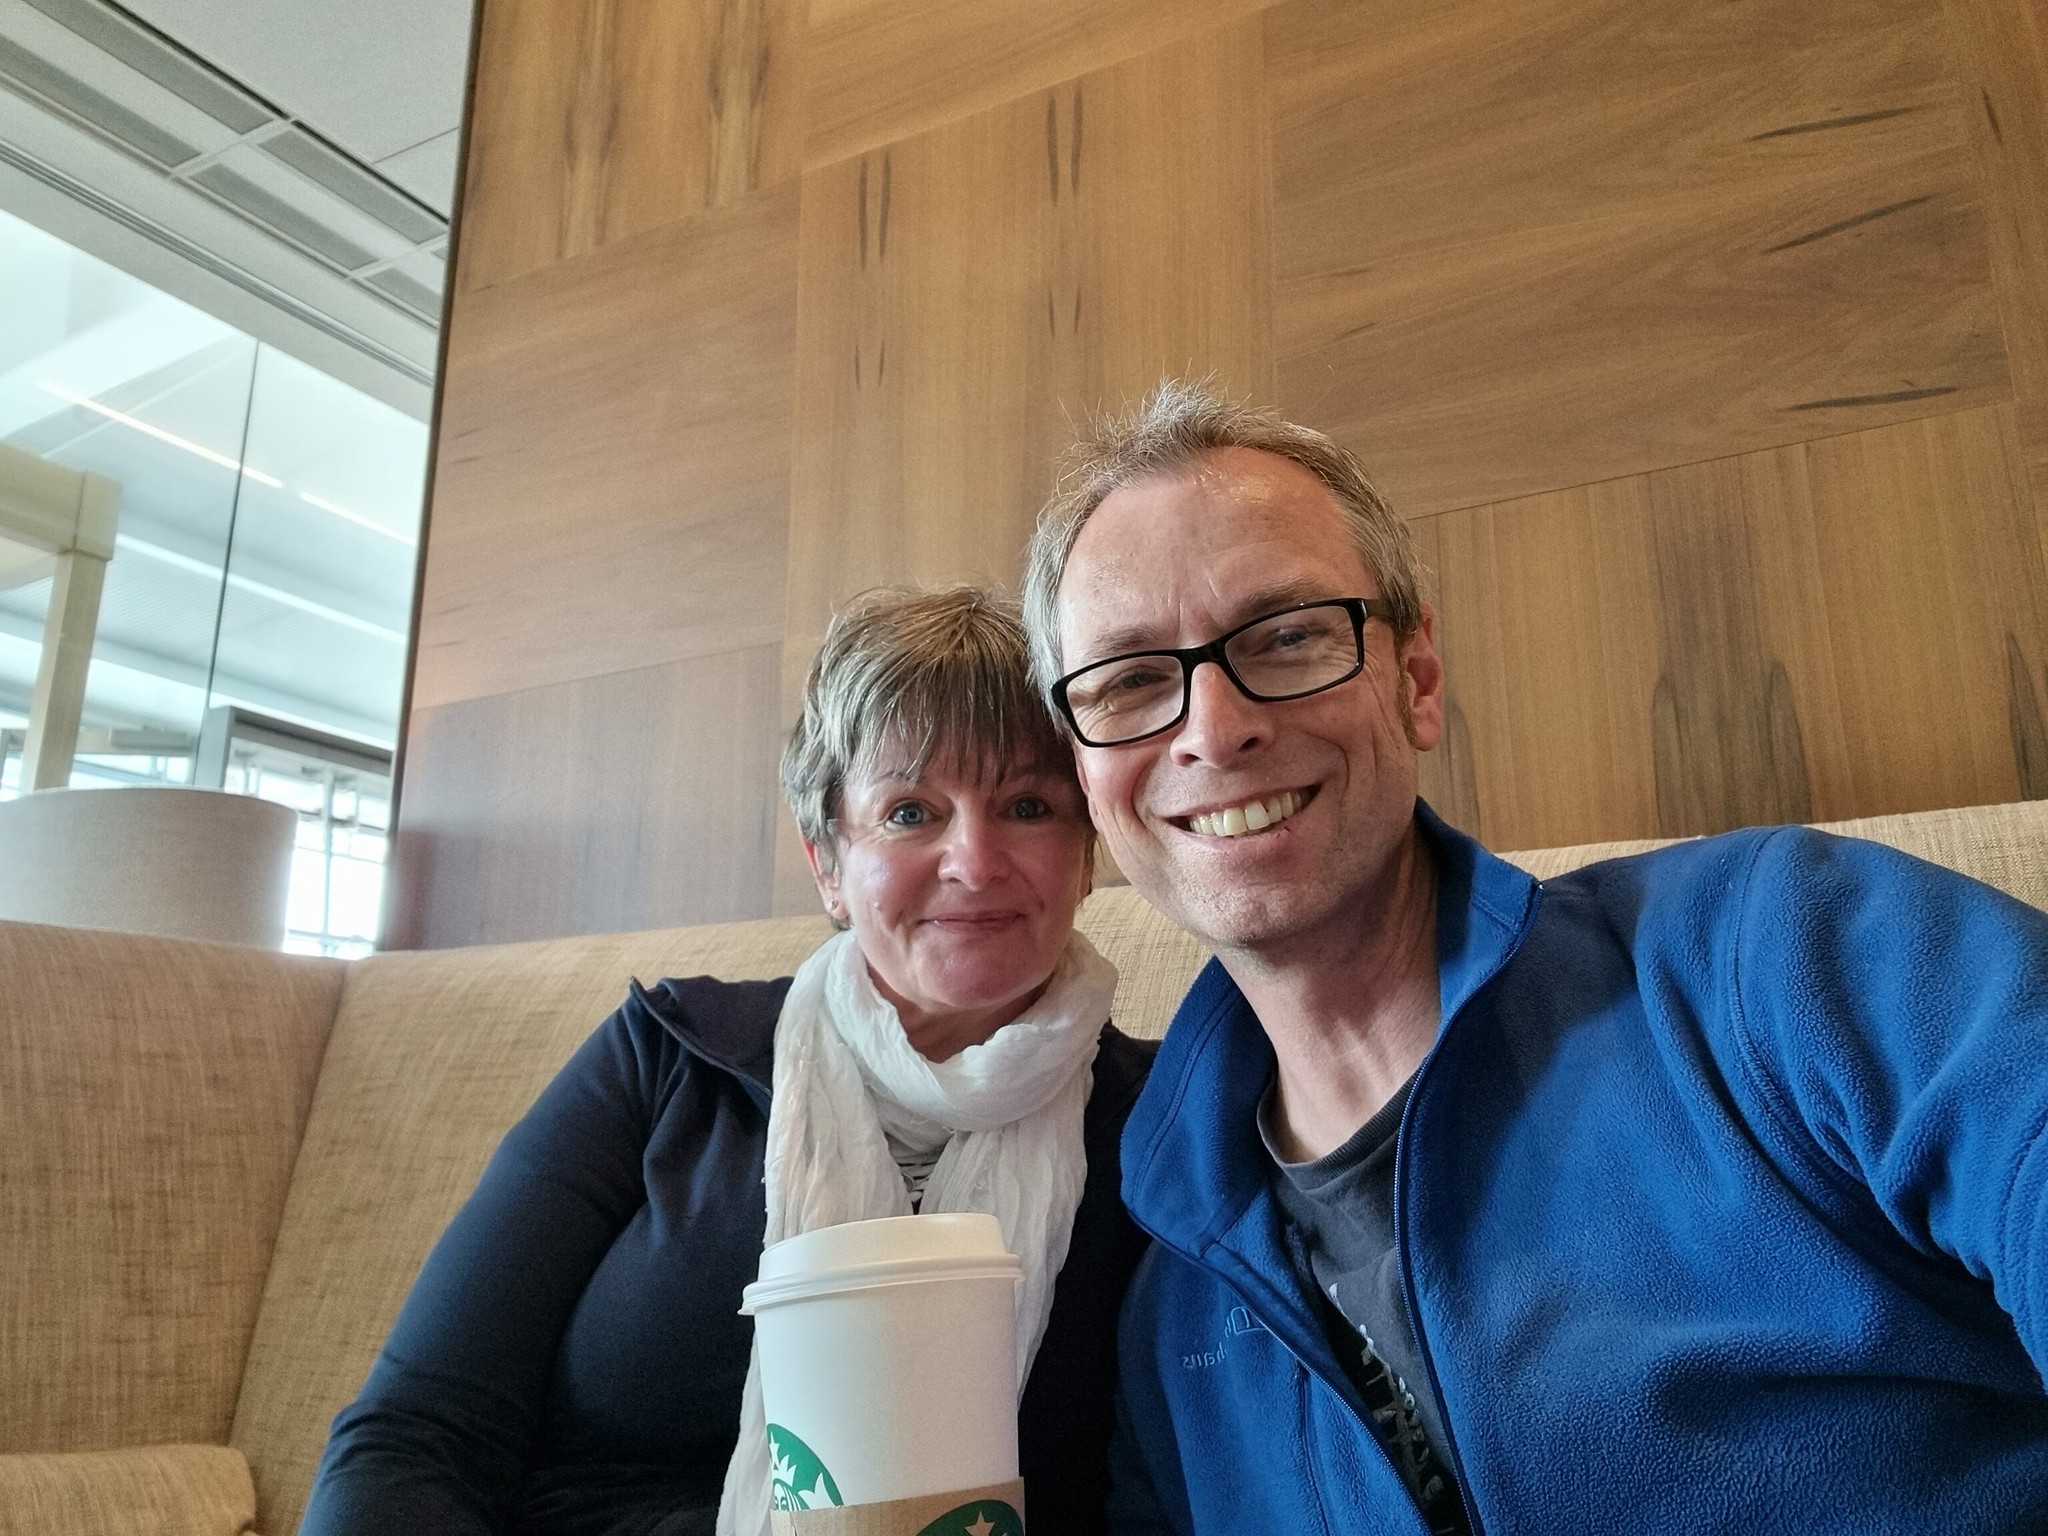 Vick and I enjoying our Starbucks in the CCR at Heathrow T5